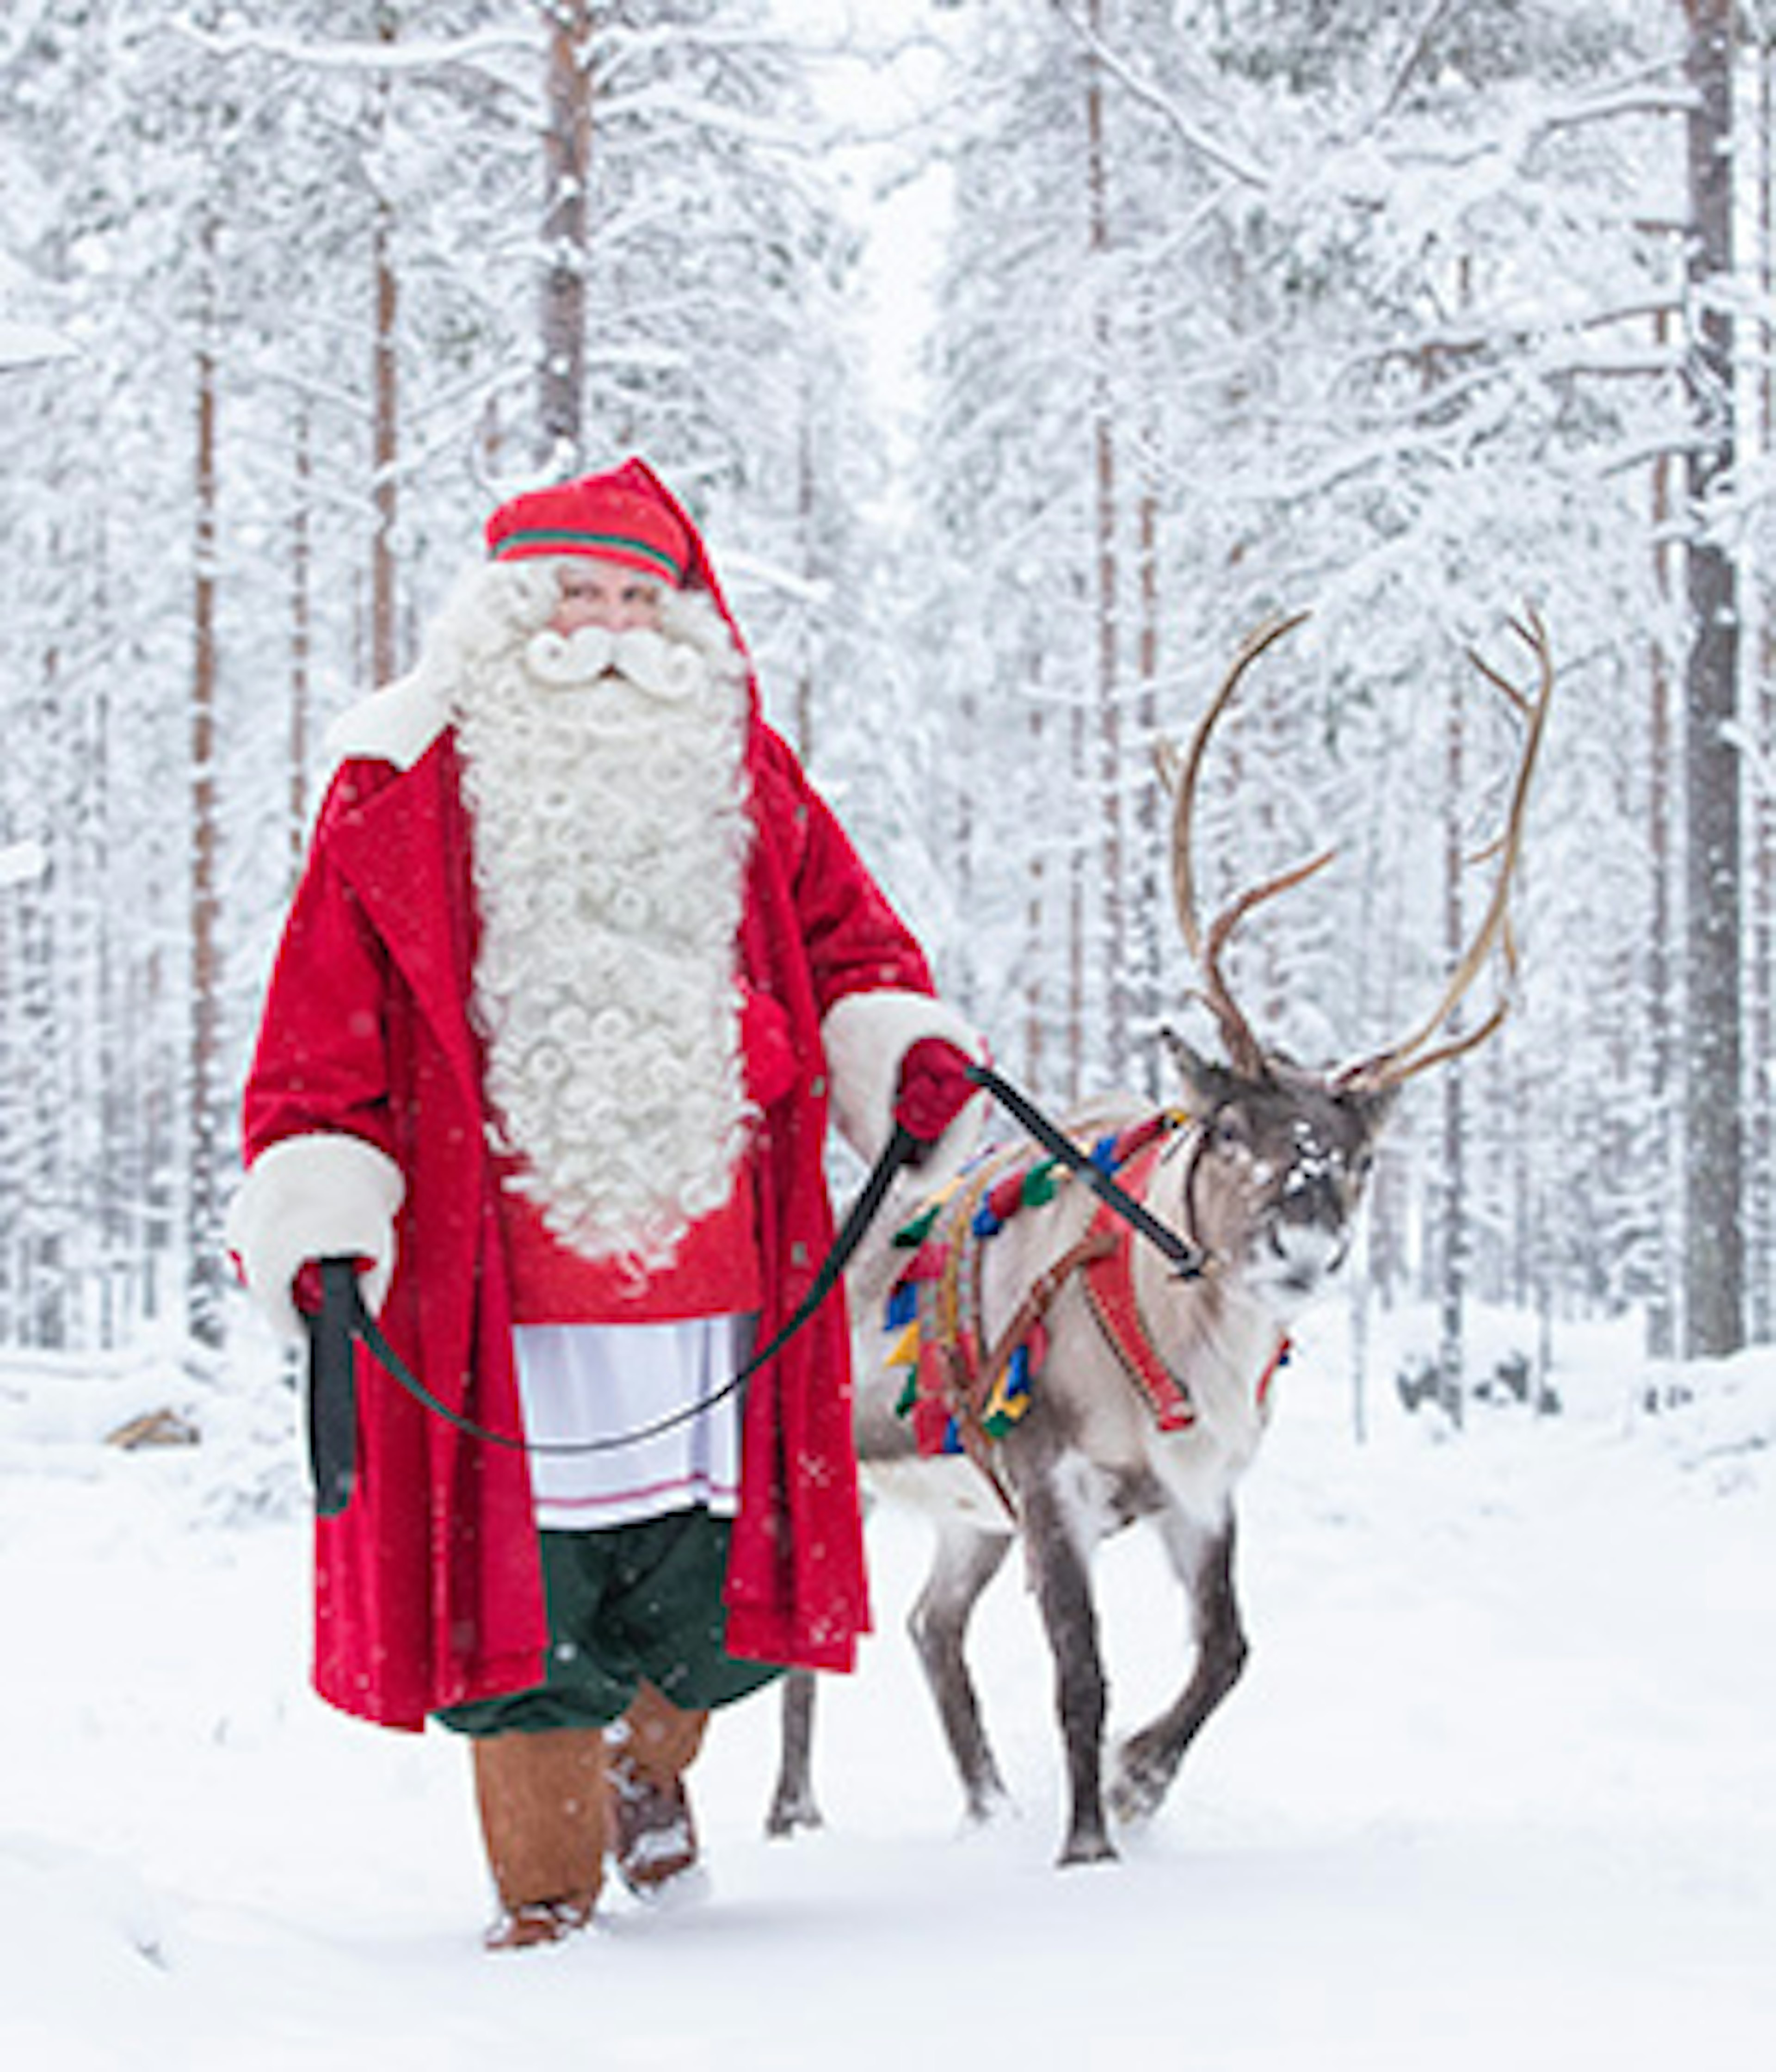 A Finnish Santa with his reindeer in the snowy woods of Rovaniemi